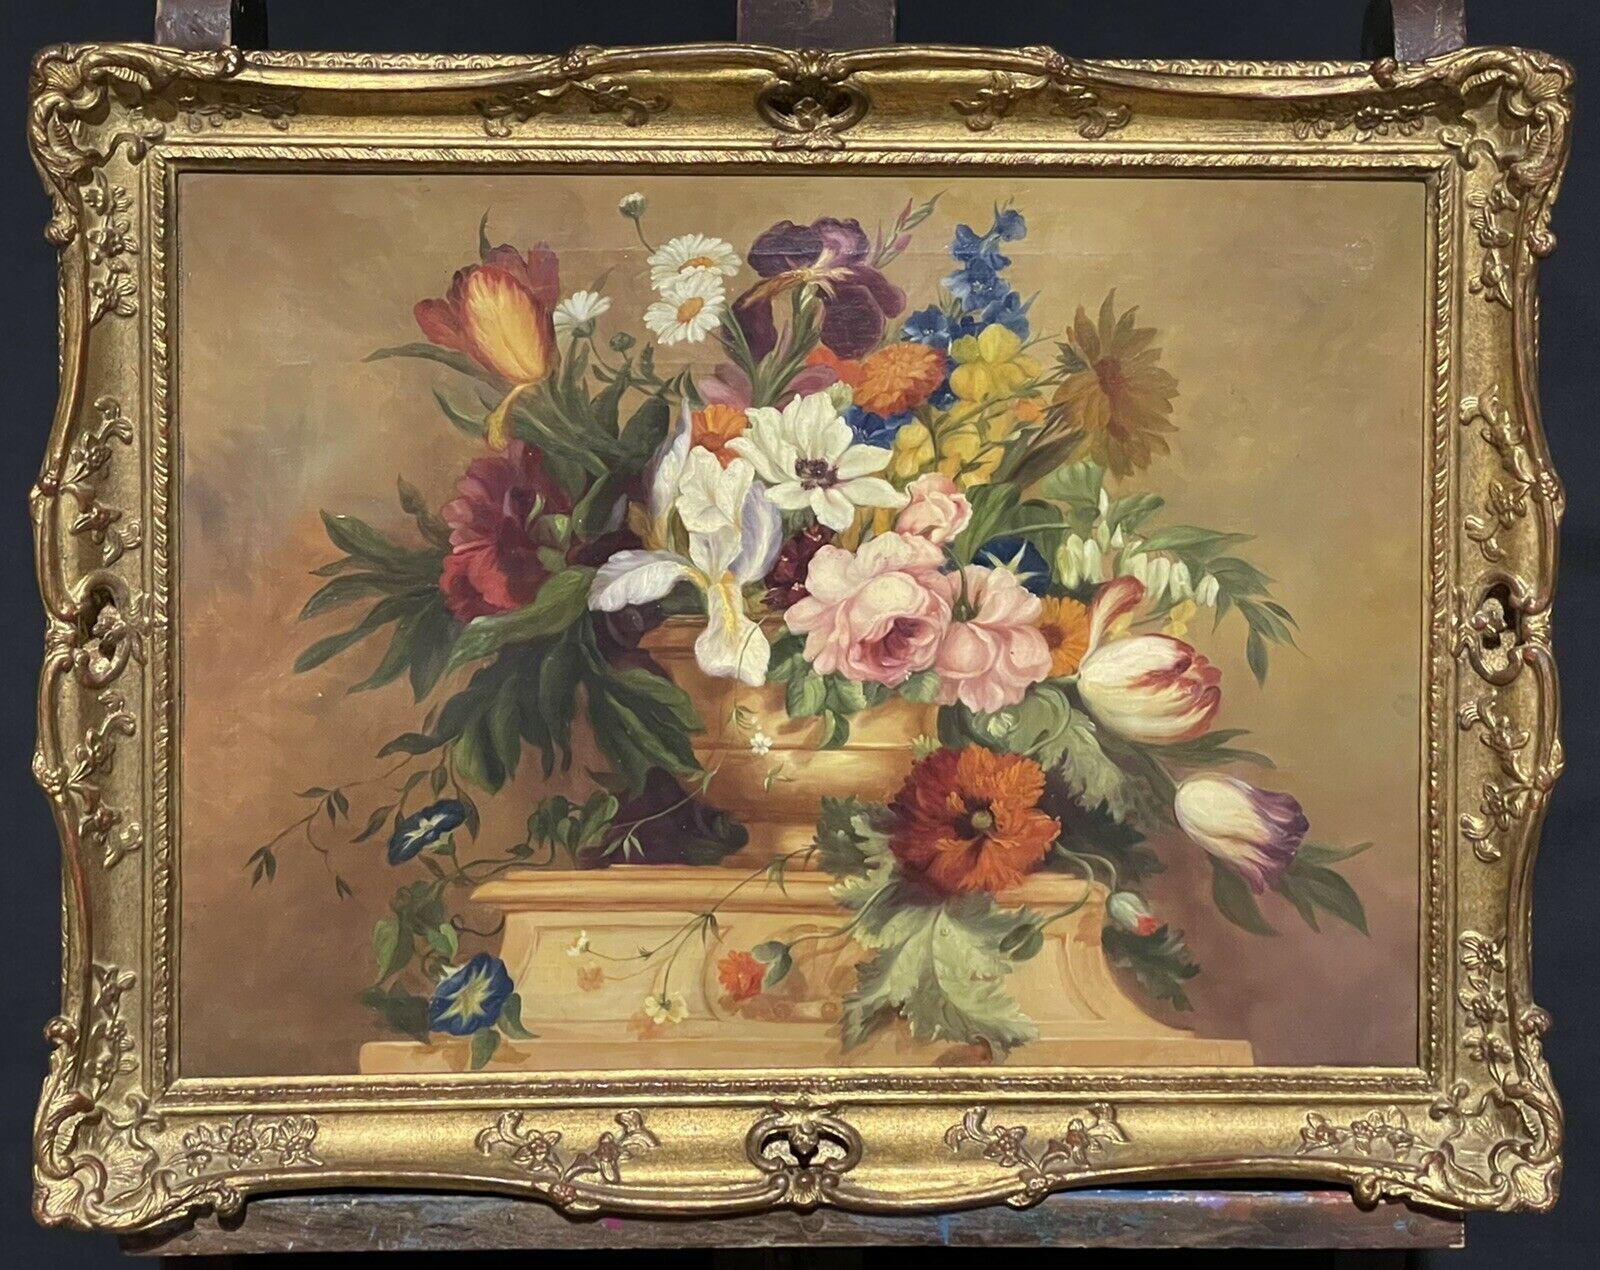 Unknown Still-Life Painting - FINE ENGLISH CLASSICAL STILL LIFE OIL PAINTING - ORNATE FLOWERS IN VASE/ PLINTH